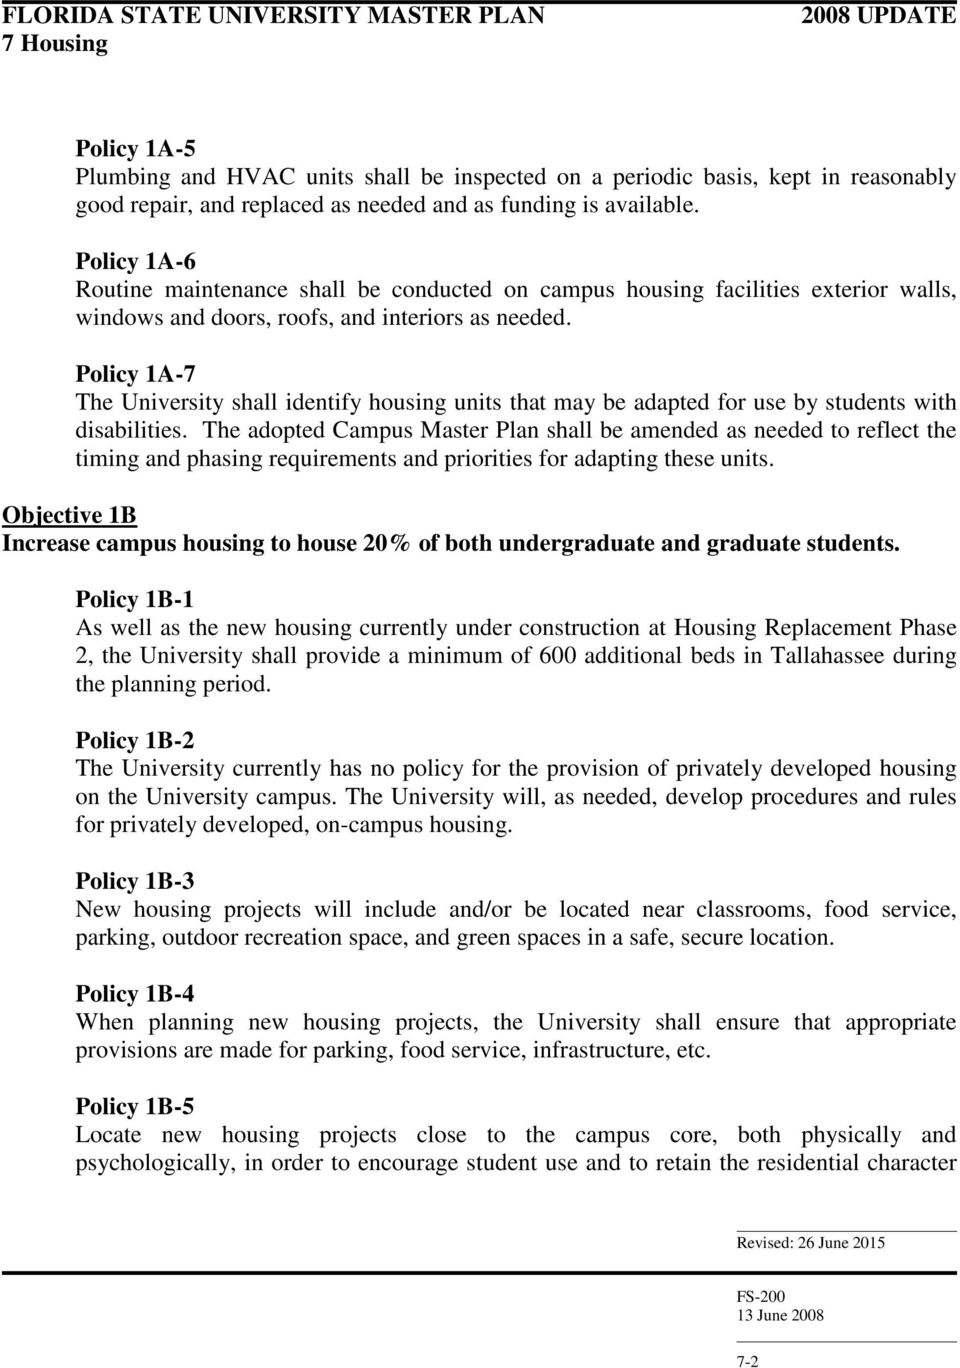 Policy 1A-7 The University shall identify housing units that may be adapted for use by students with disabilities.